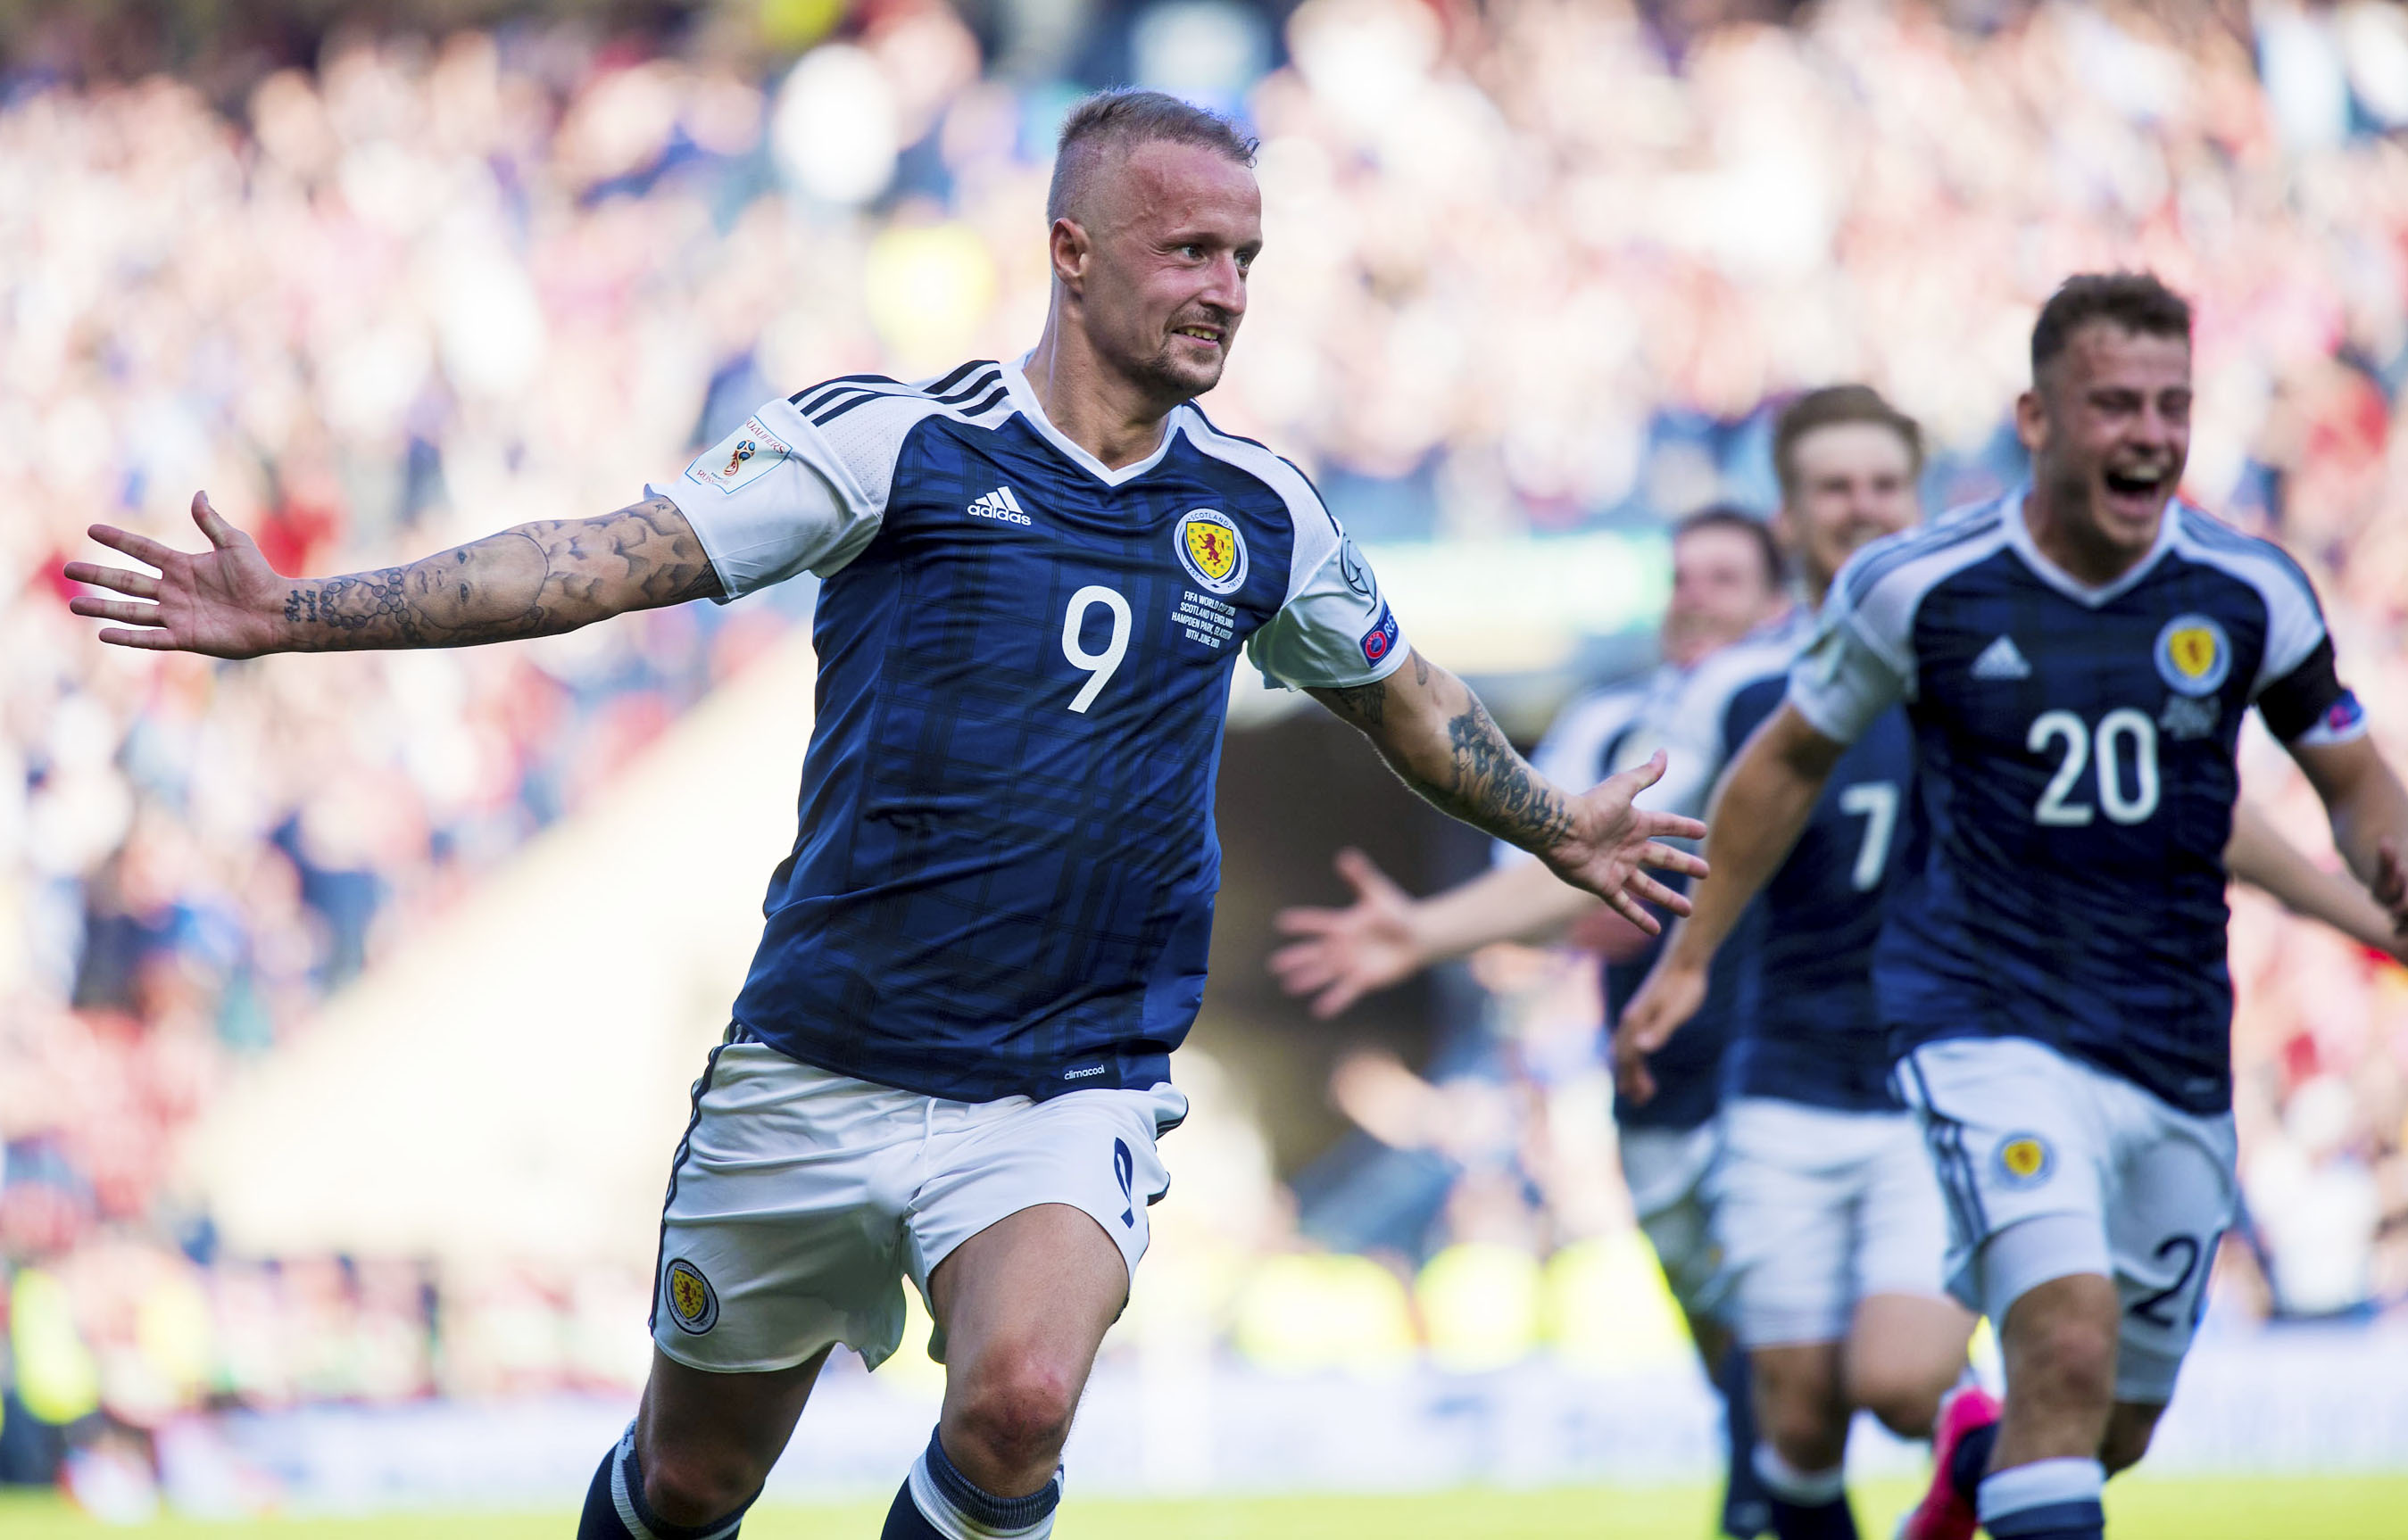 Memories of Leigh Griffiths scoring against England may force him into the reckoning.